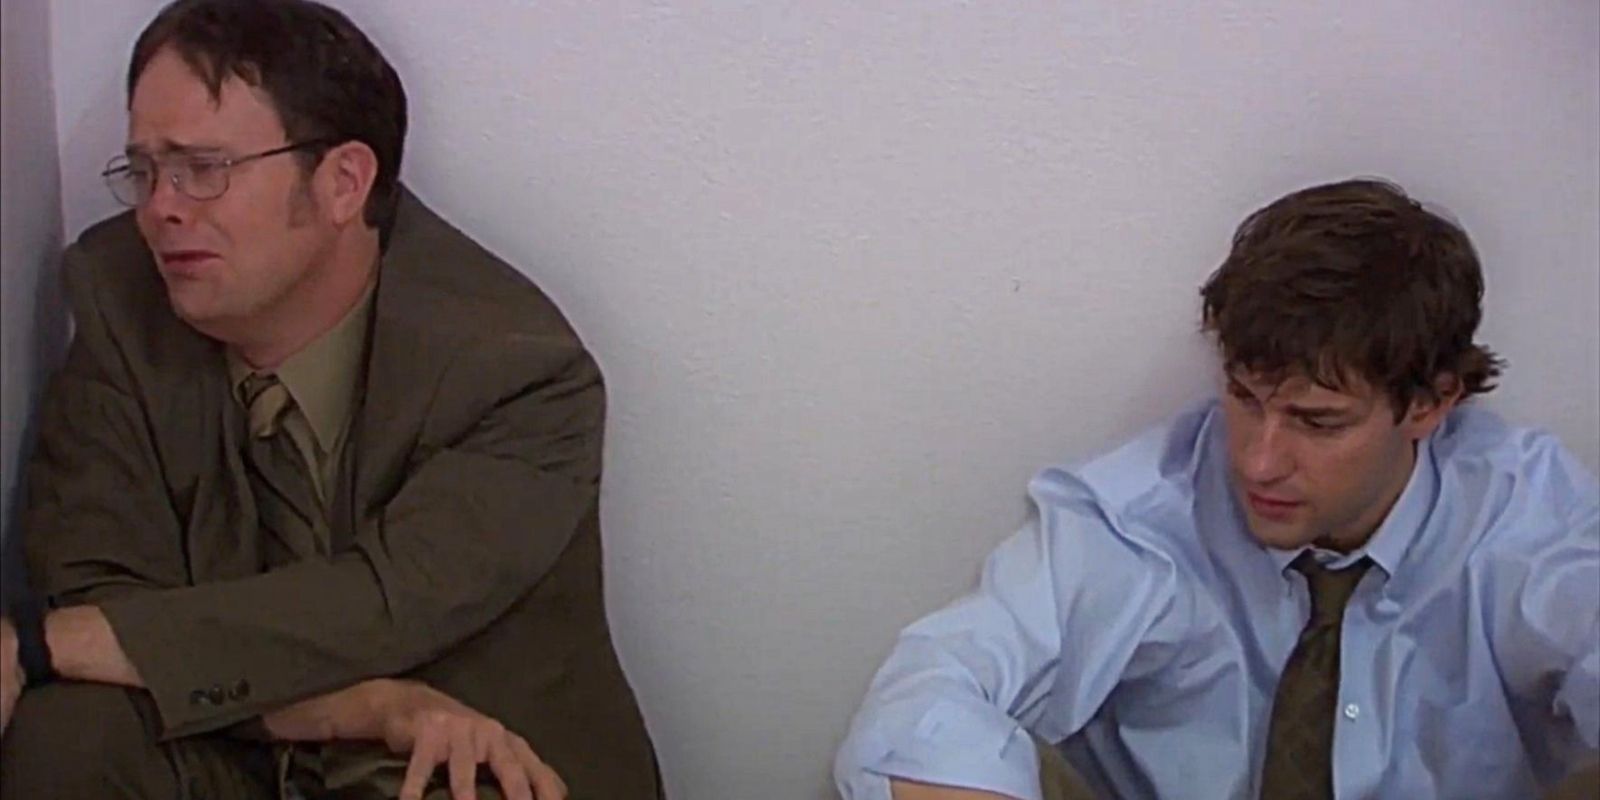 Jim trying to comfort a crying Dwight on The Office